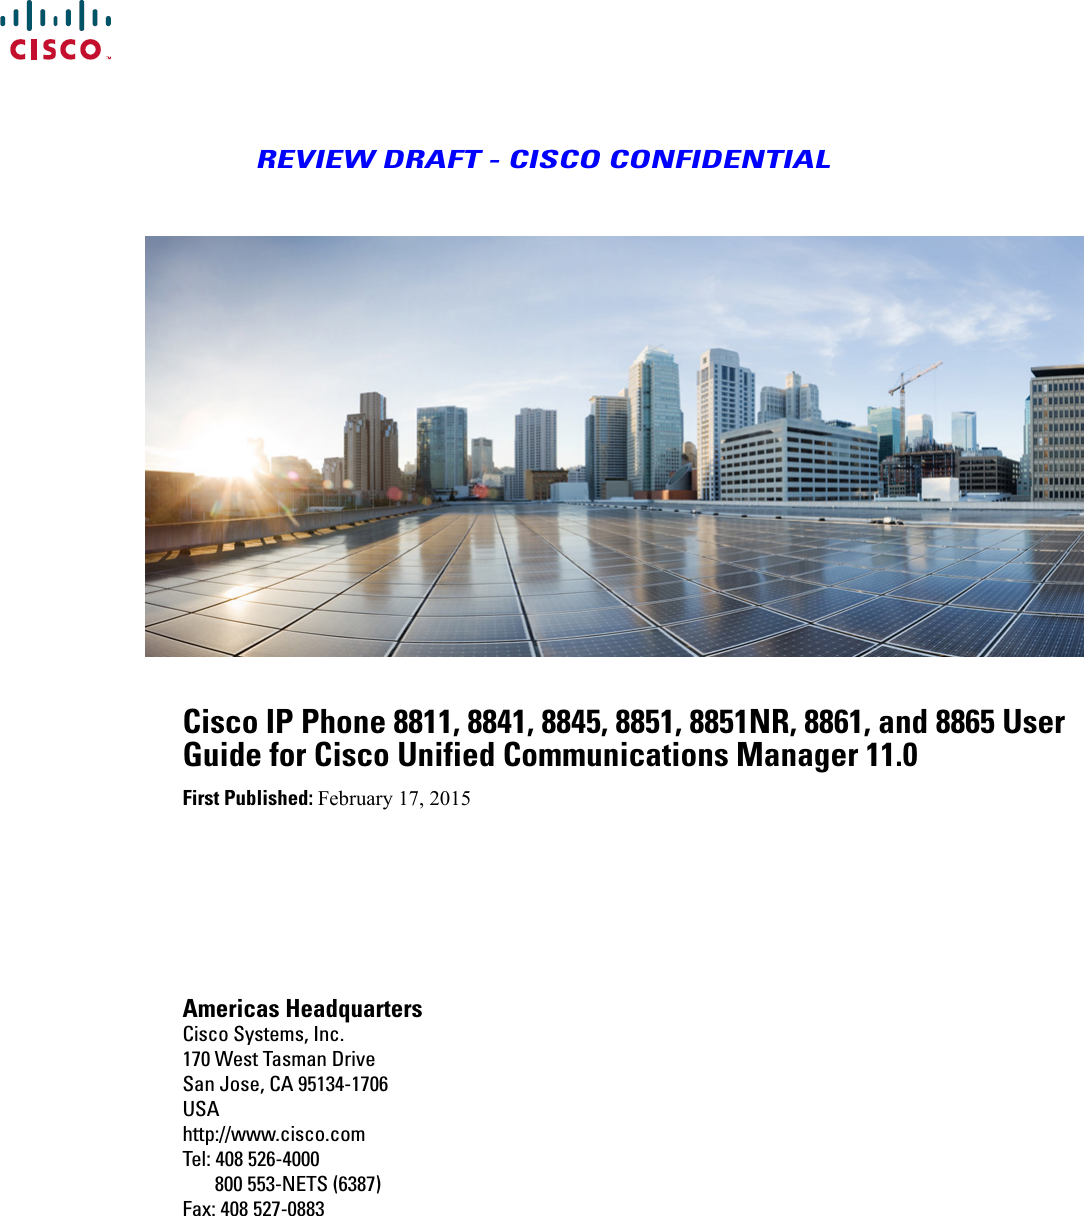 REVIEW DRAFT - CISCO CONFIDENTIALCisco IP Phone 8811, 8841, 8845, 8851, 8851NR, 8861, and 8865 UserGuide for Cisco Unified Communications Manager 11.0First Published: February 17, 2015Americas HeadquartersCisco Systems, Inc.170 West Tasman DriveSan Jose, CA 95134-1706USAhttp://www.cisco.comTel: 408 526-4000       800 553-NETS (6387)Fax: 408 527-0883